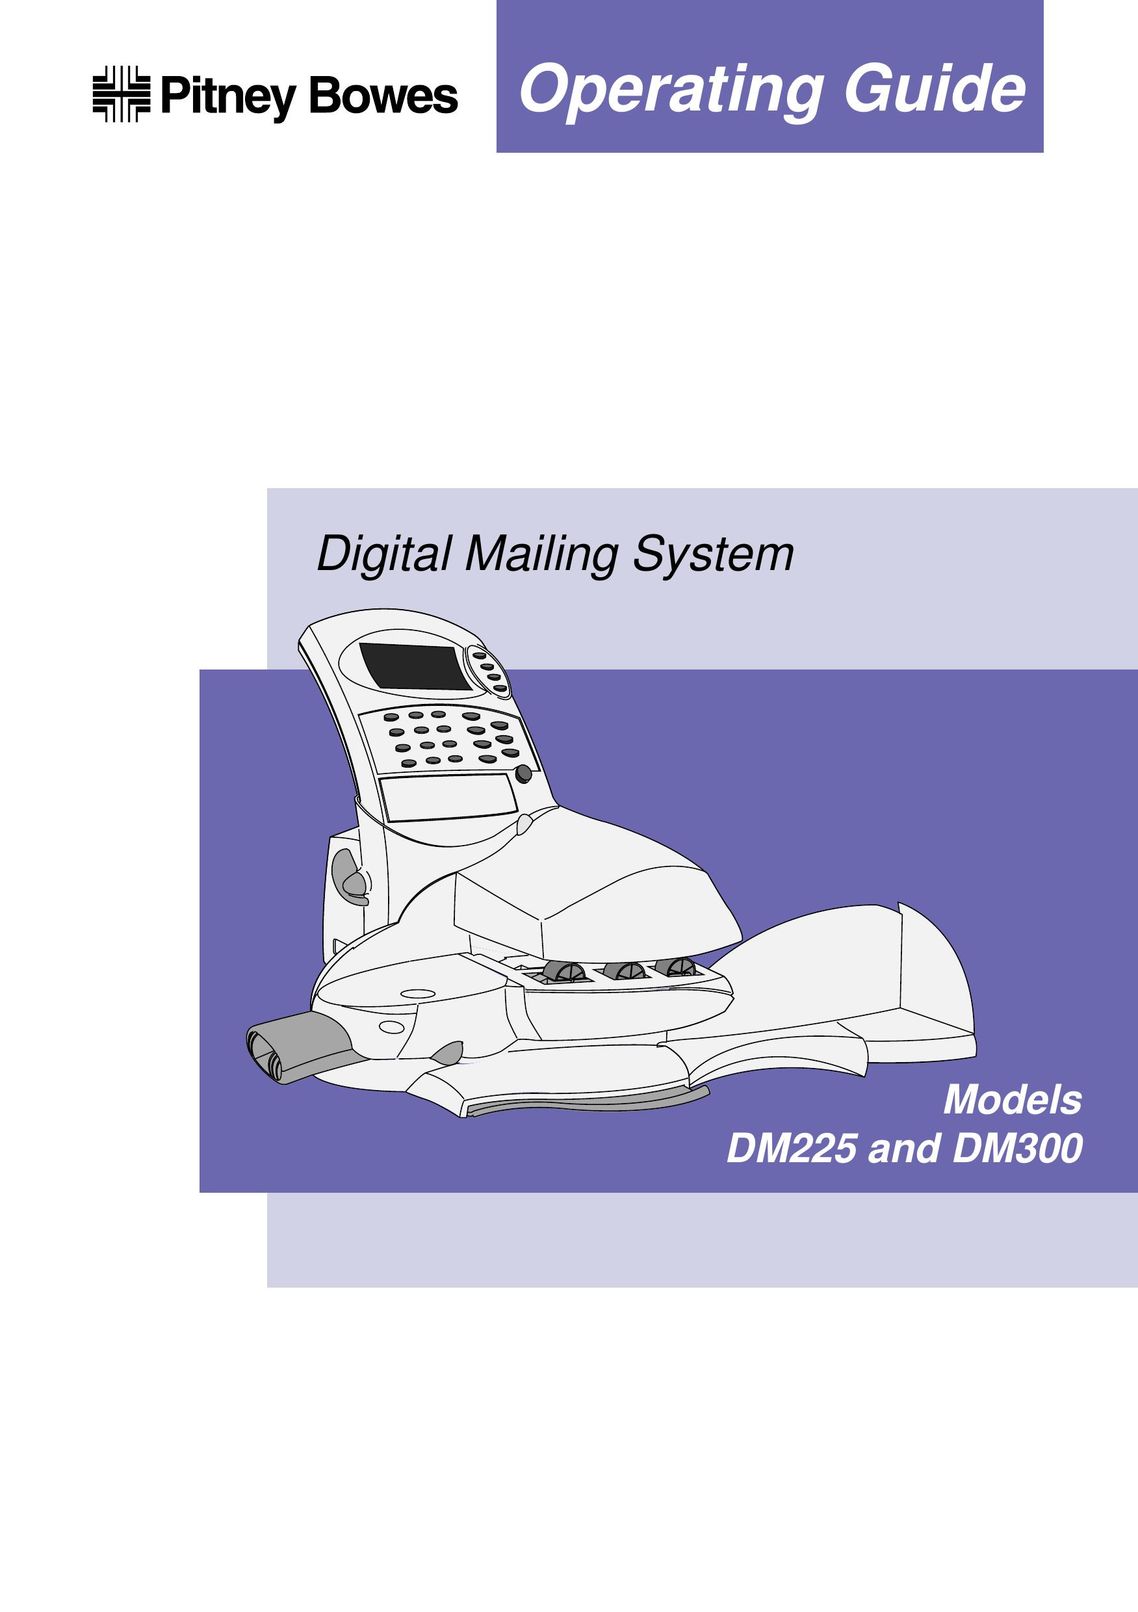 Pitney Bowes DM300 All in One Printer User Manual